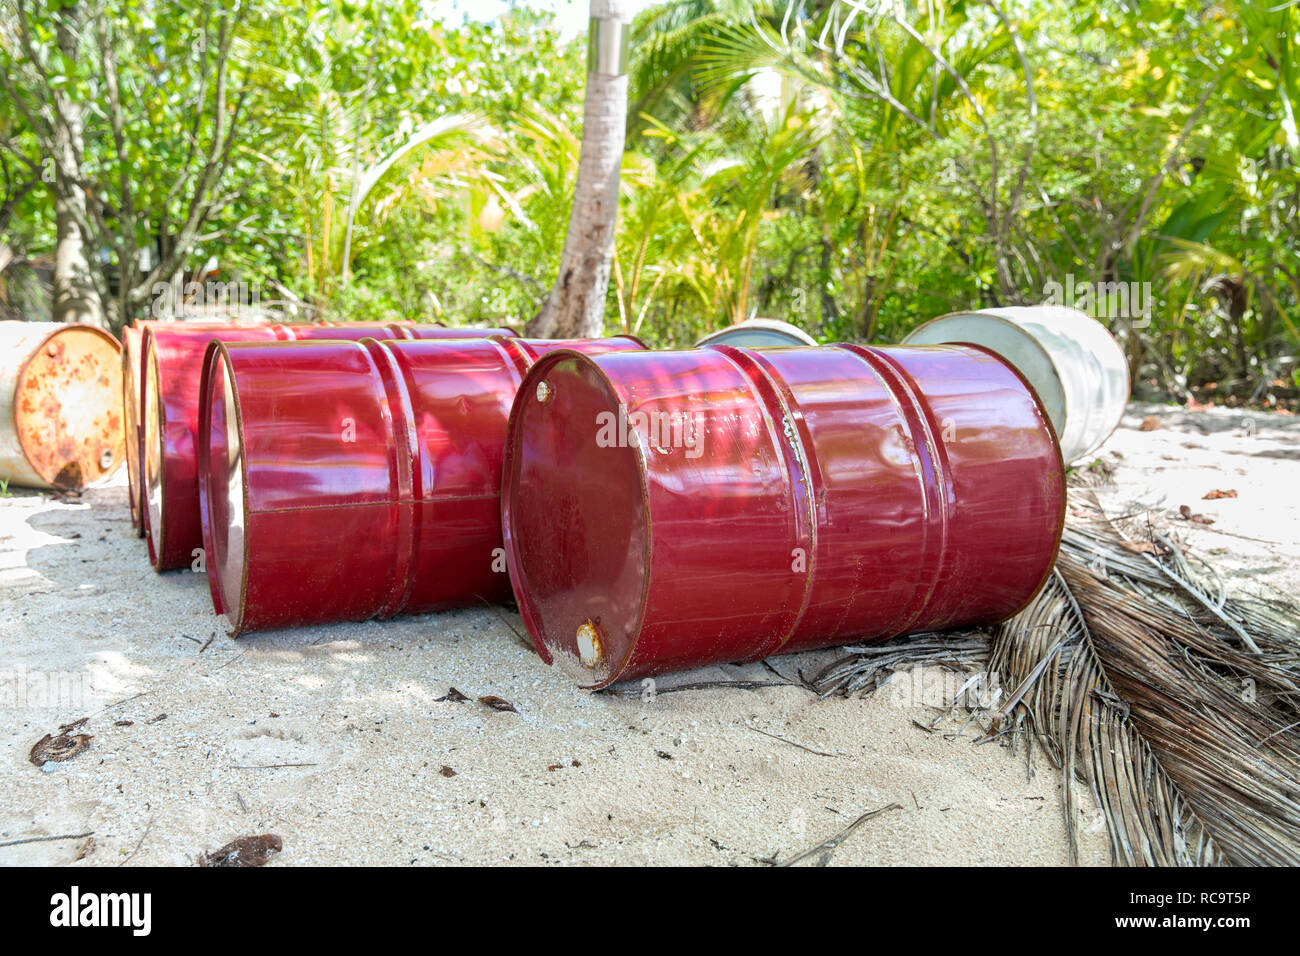 oil drum barrels on beach in french polynesia Stock Photo